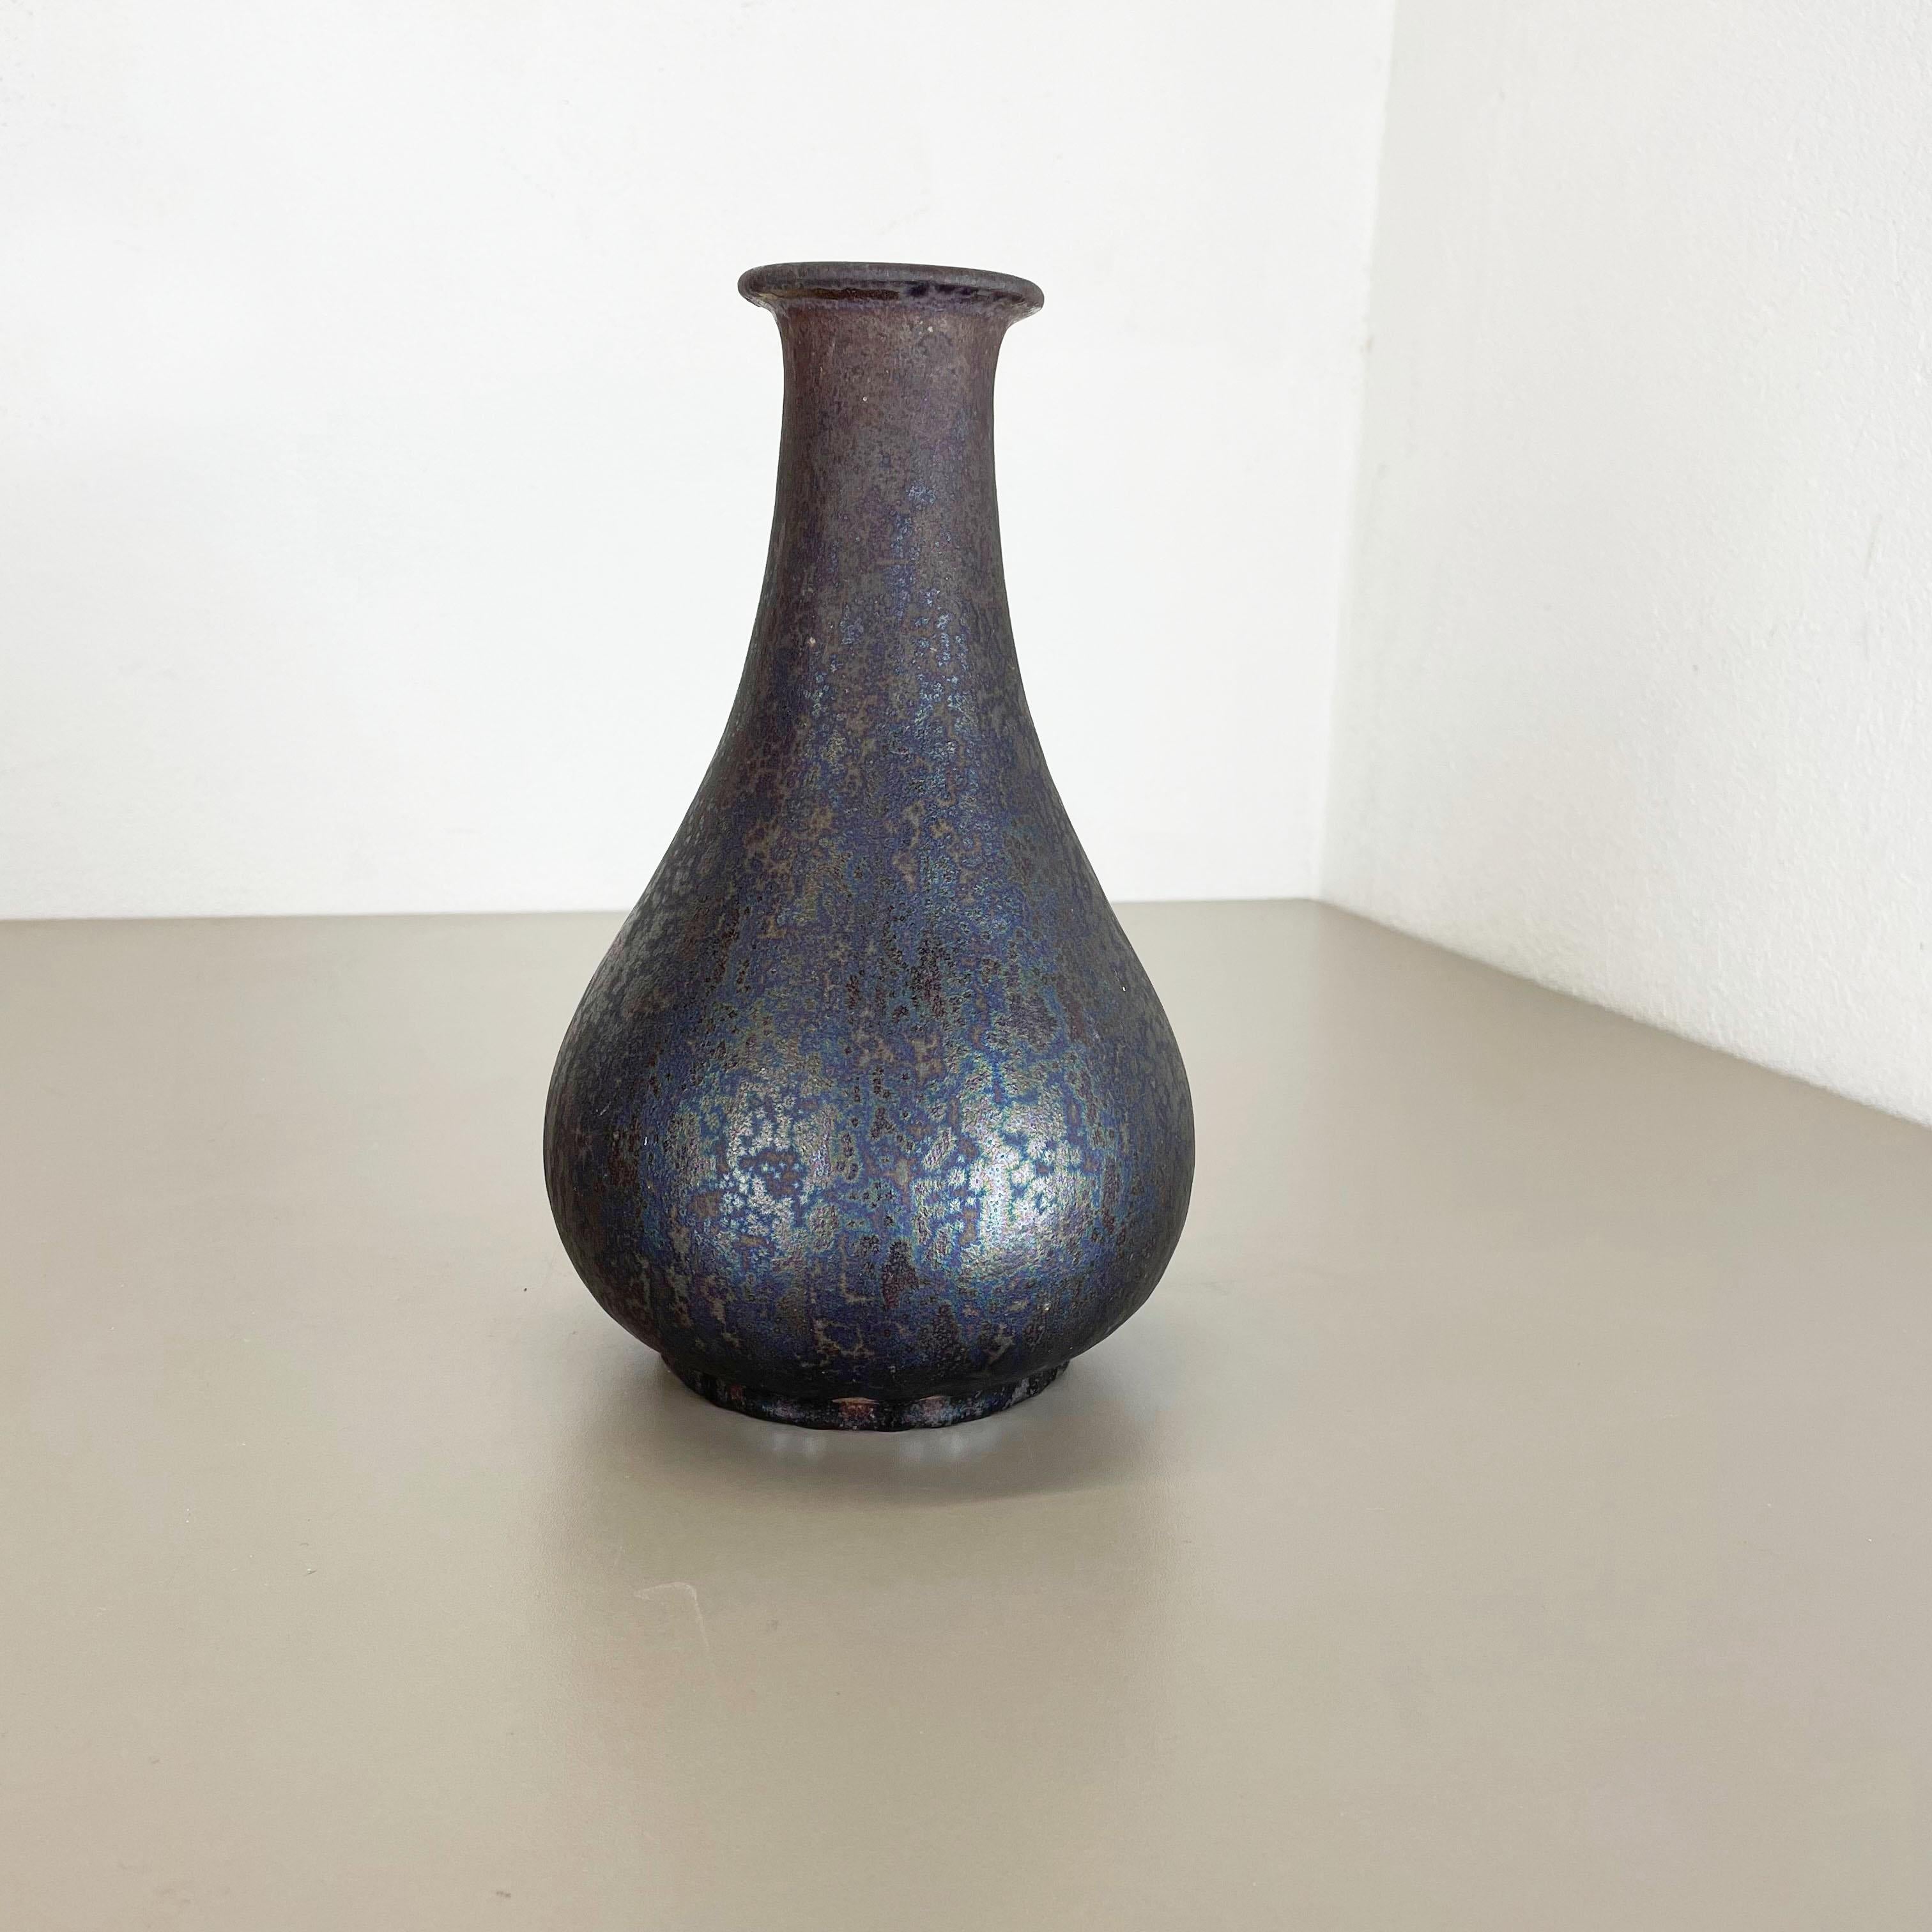 Article:

Fat lava art vase


Model: 830


Producer:

Ruscha, Germany



Decade:

1970s




This original vintage vase was produced in the 1970s in Germany. It is made of ceramic pottery in fat lava optic with abstract